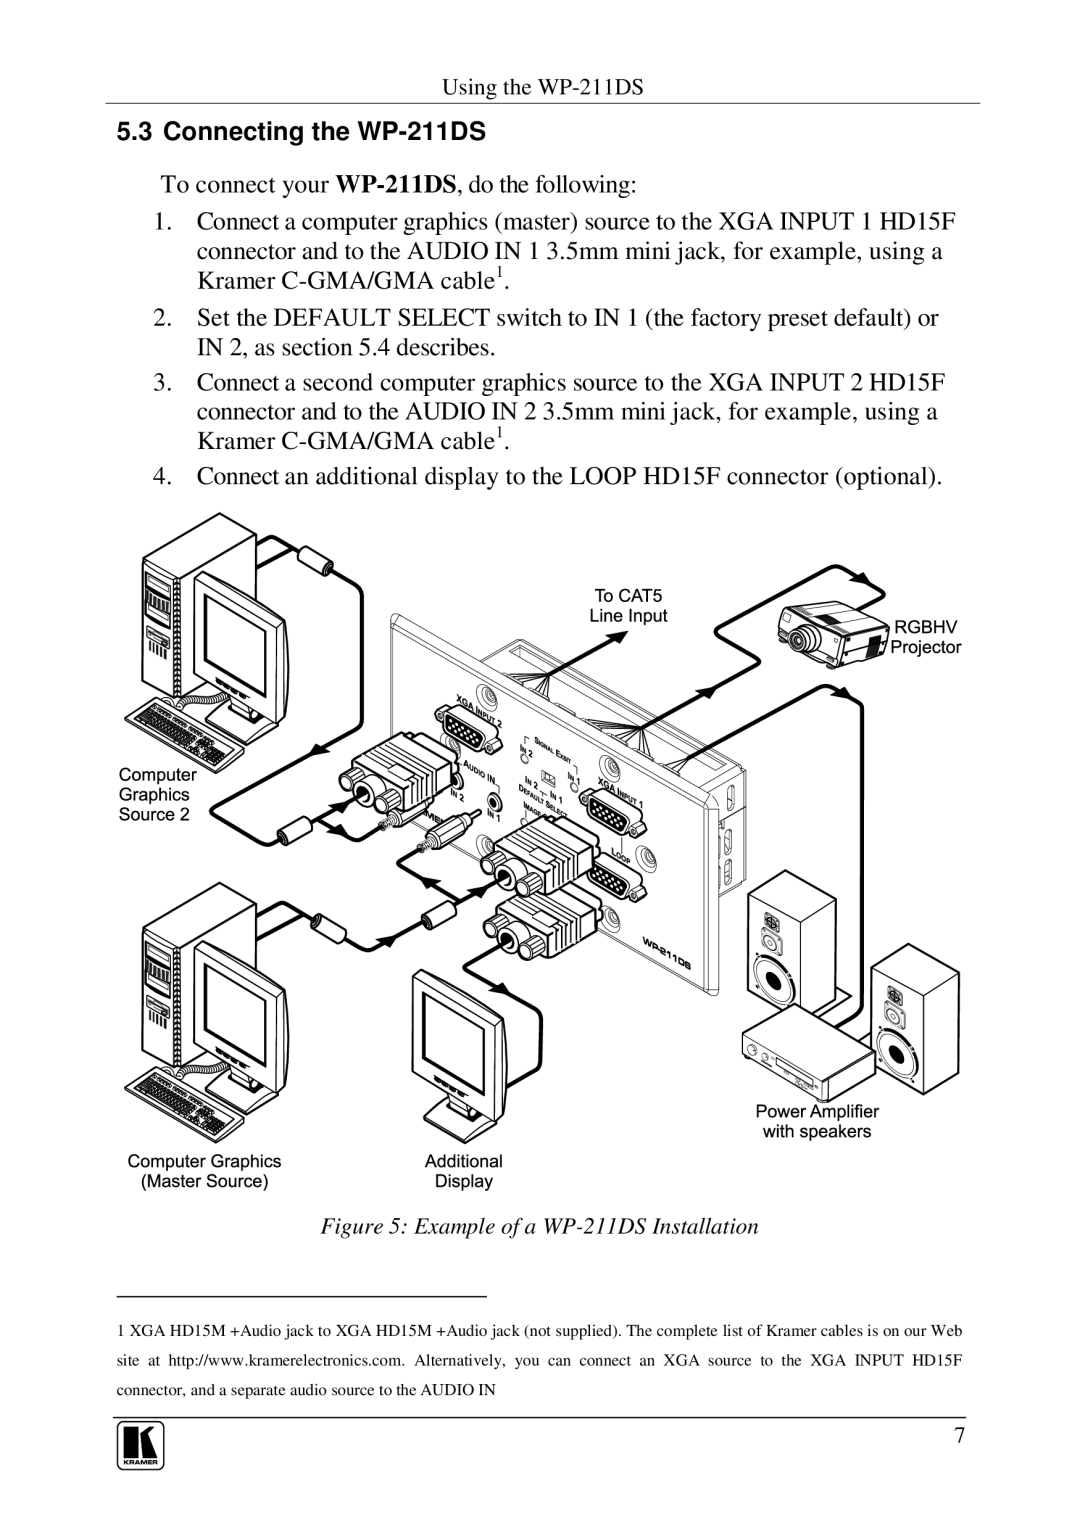 Kramer Electronics user manual Connecting the WP-211DS, Example of a WP-211DS Installation 